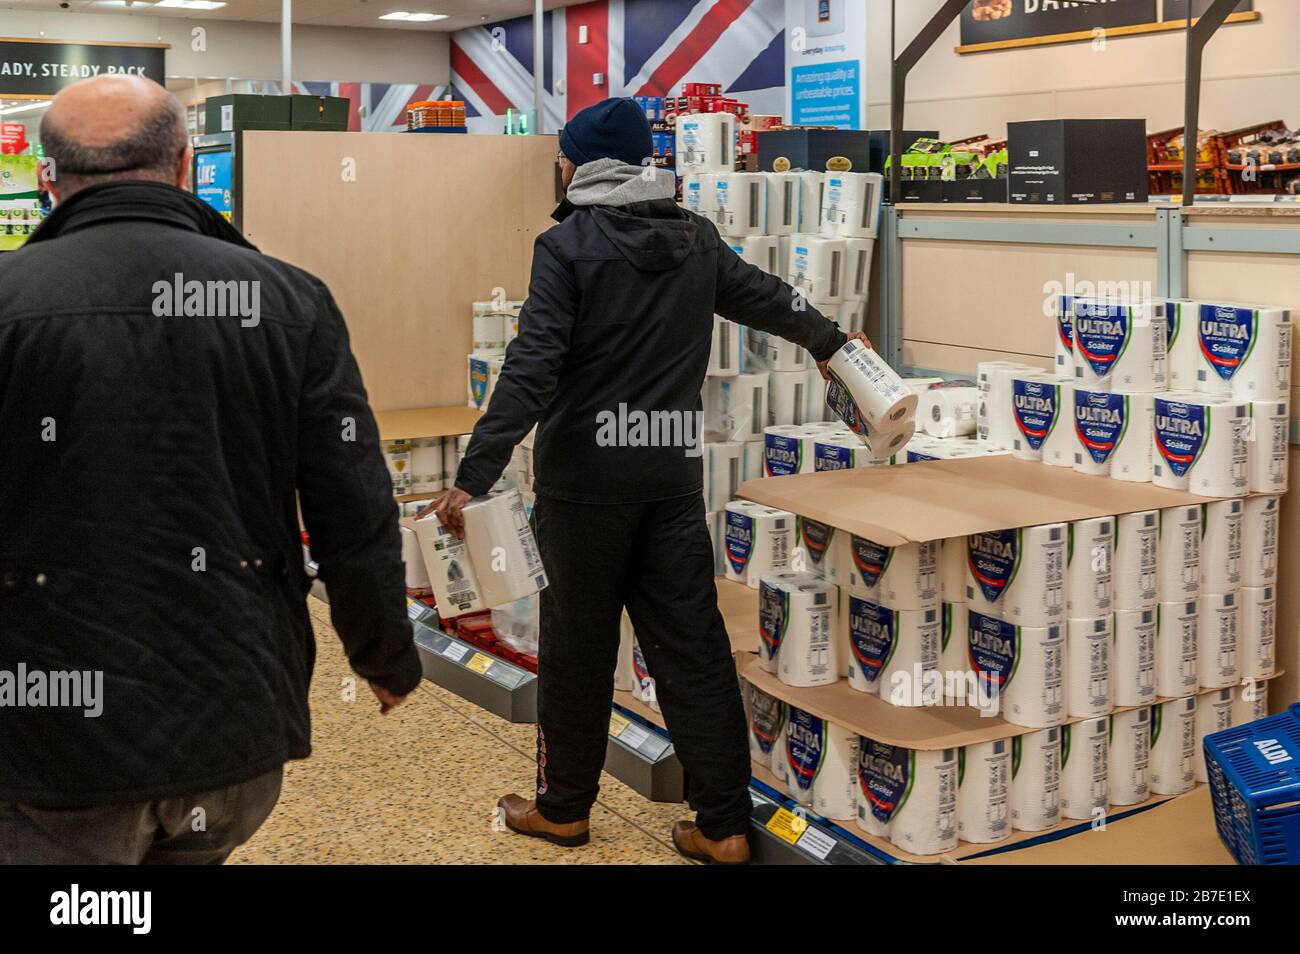 Coventry, West Midlands, UK. 15th Mar, 2020. Aldi Stores in Gallagher Retail Park was full of shoppers panic buying today. Aldi management restricted purchases to 4 items of each product per customer. Credit: Andy Gibson/Alamy Live News Stock Photo